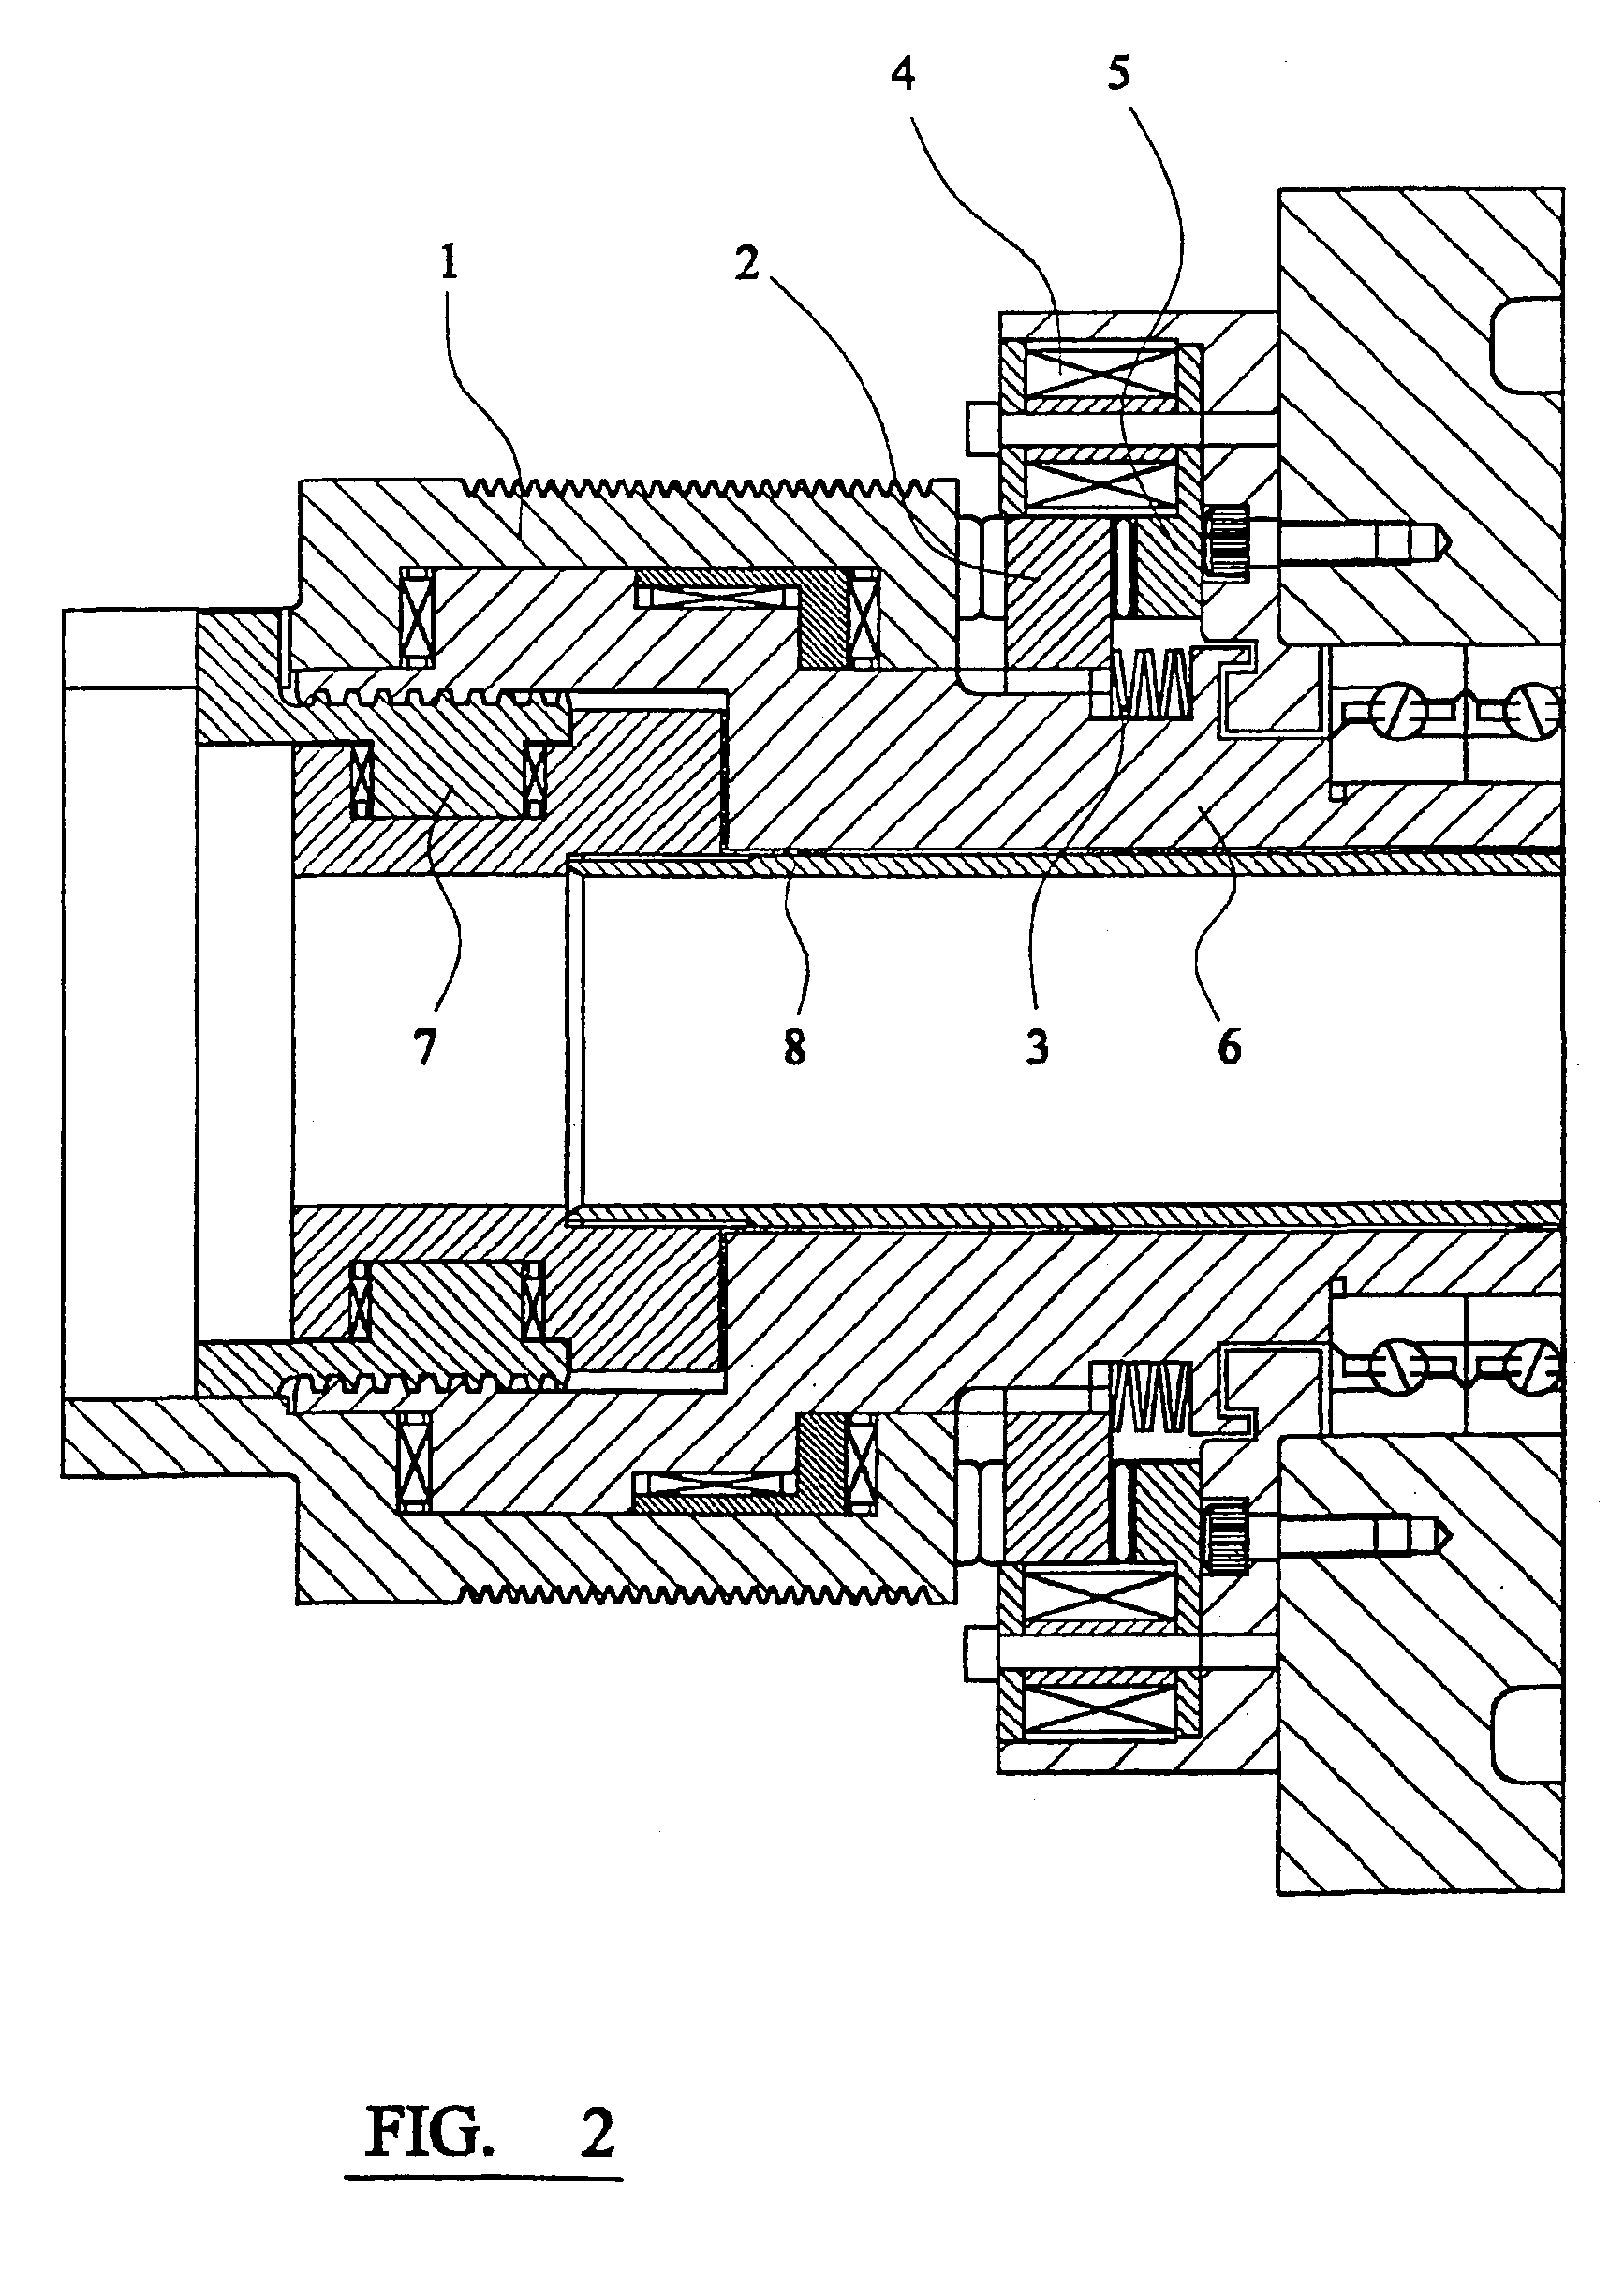 Actuator for workpiece holding device